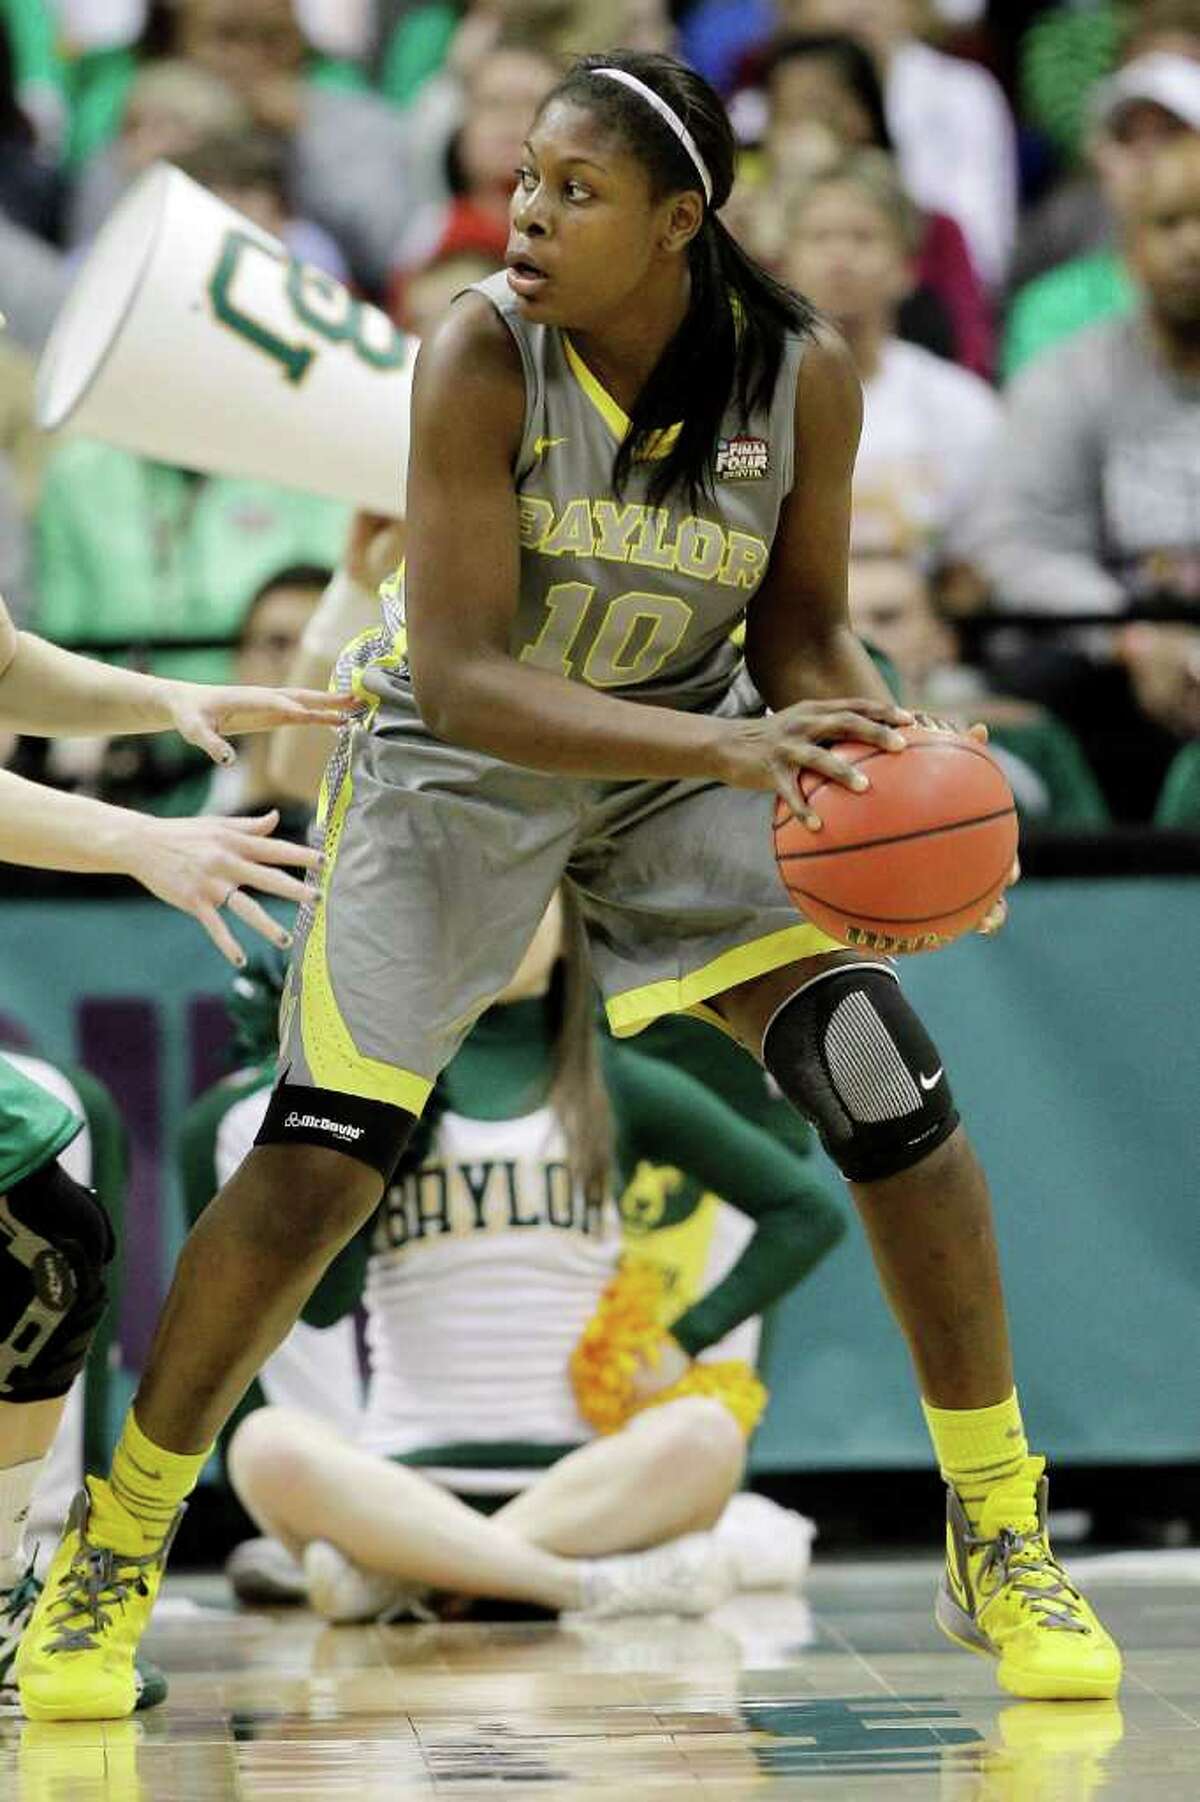 Baylor forward Destiny Williams looks to pass during the second half in the NCAA Women's Final Four college basketball championship game against Notre Dame in Denver, Tuesday, April 3, 2012. (AP Photo/Eric Gay)